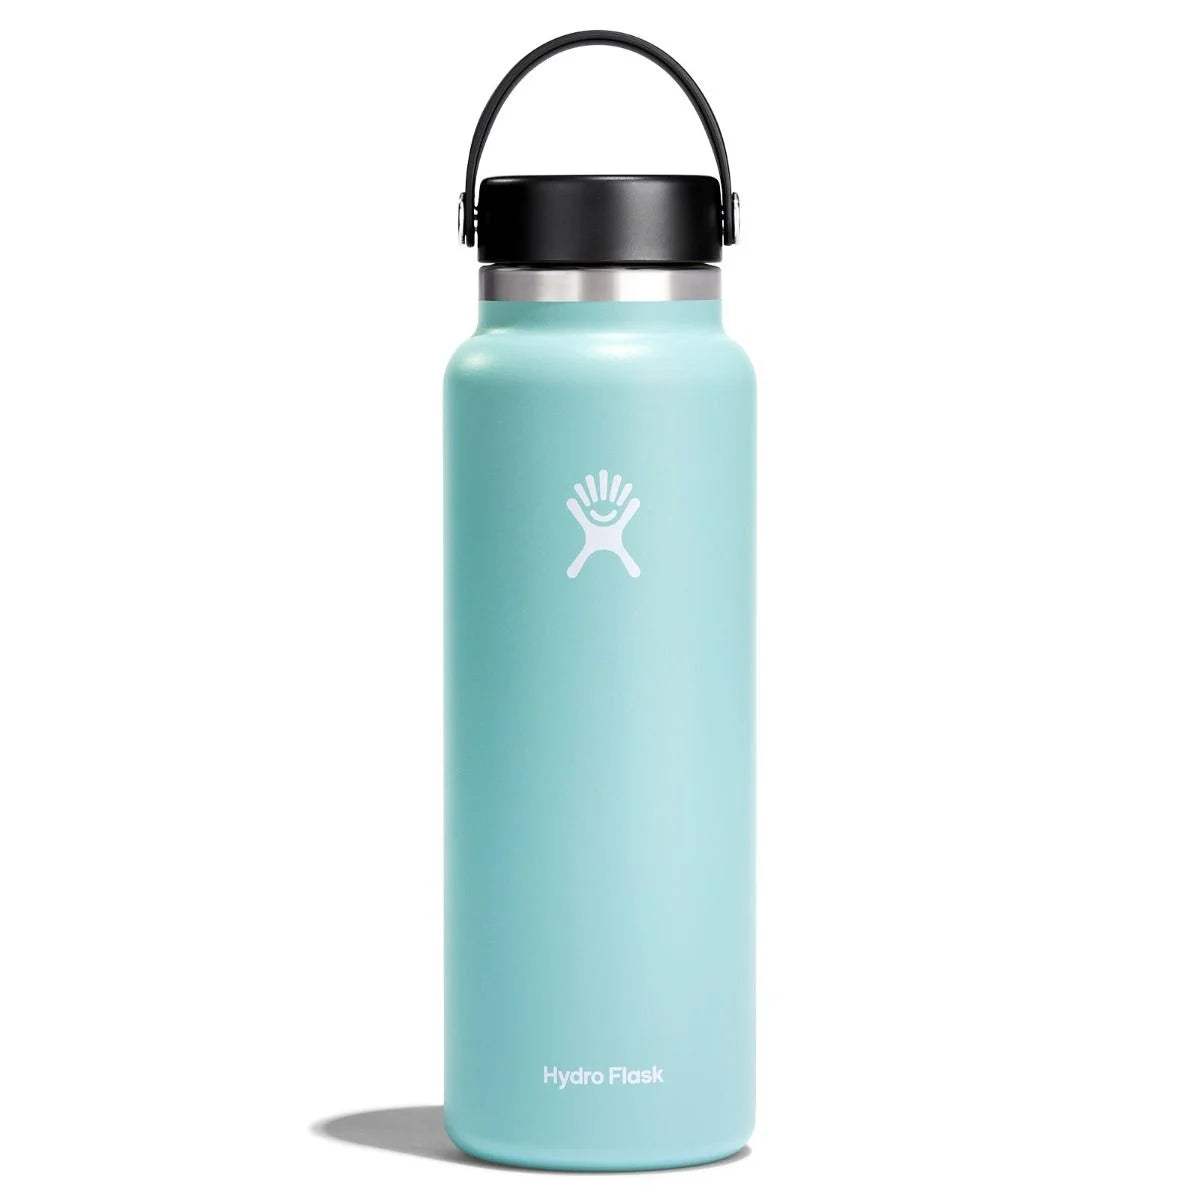 40 oz (1,182 ml) Wide Mouth Hydro Flask - The Luxury Promotional Gifts Company Limited